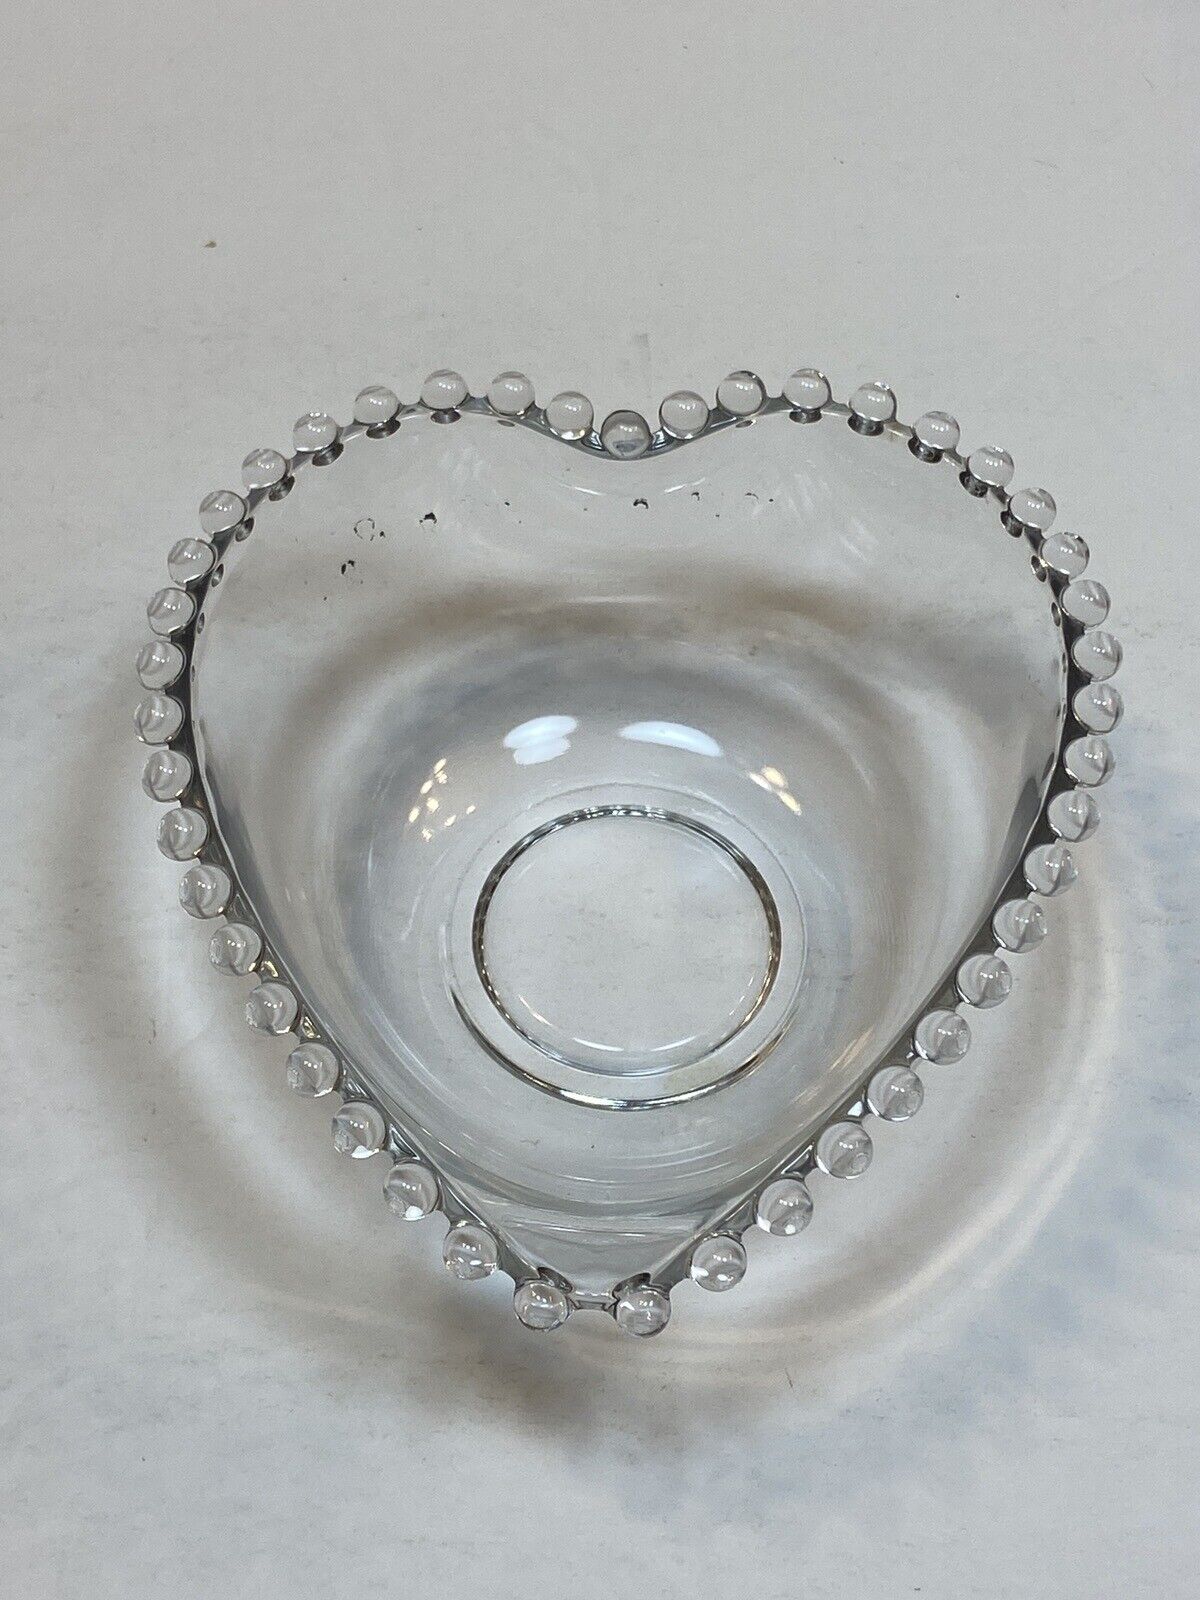 Imperial Candlewick Hobnail Clear Glass Dish Heart Shaped Candy Bowl Vintage Old